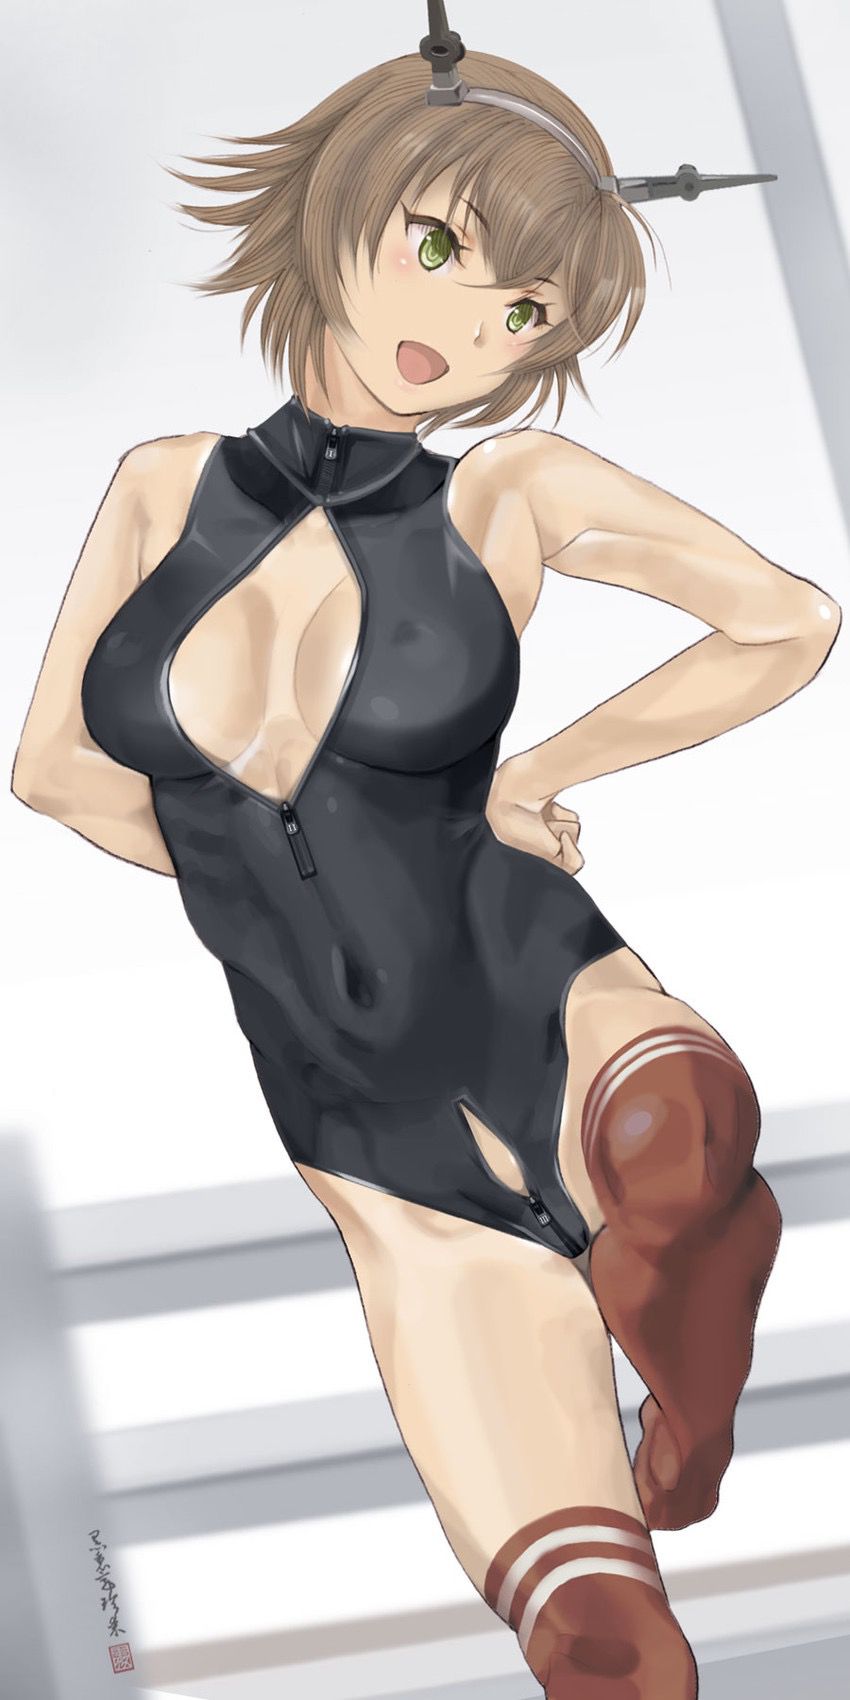 [Large image] from www biting open dimensional girl breast wearing a swimsuit is too erotic and want to put in there, such as (live) 16